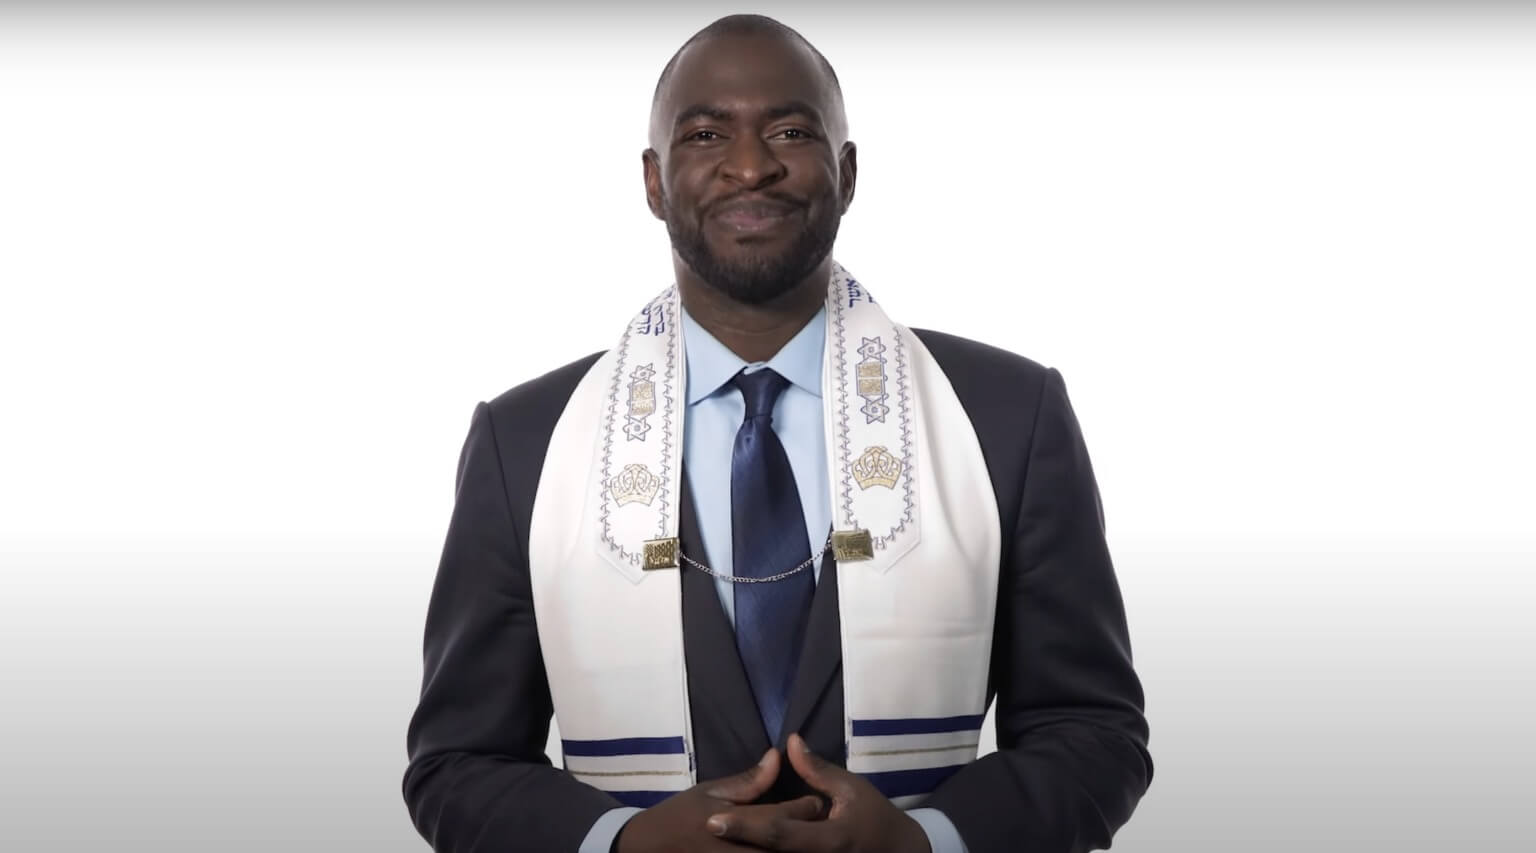 Jonathan Dade calls himself the "rabbi" of a Messianic Jewish congregation in Georgetown, Texas. His services mix elements of Jewish and Christian traditions.